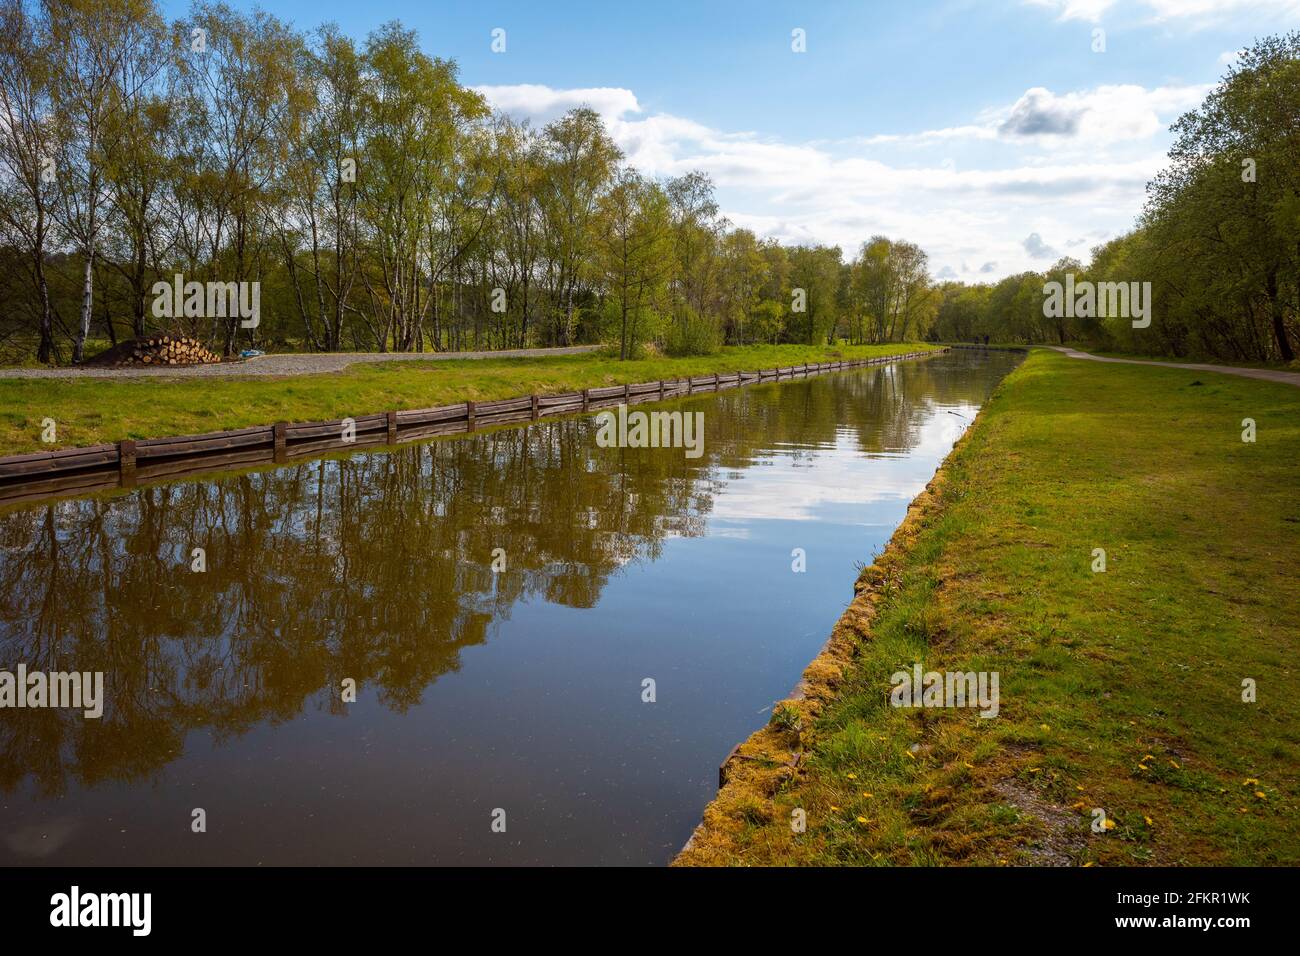 canal water way Bridgewater Greater Manchester Stock Photo